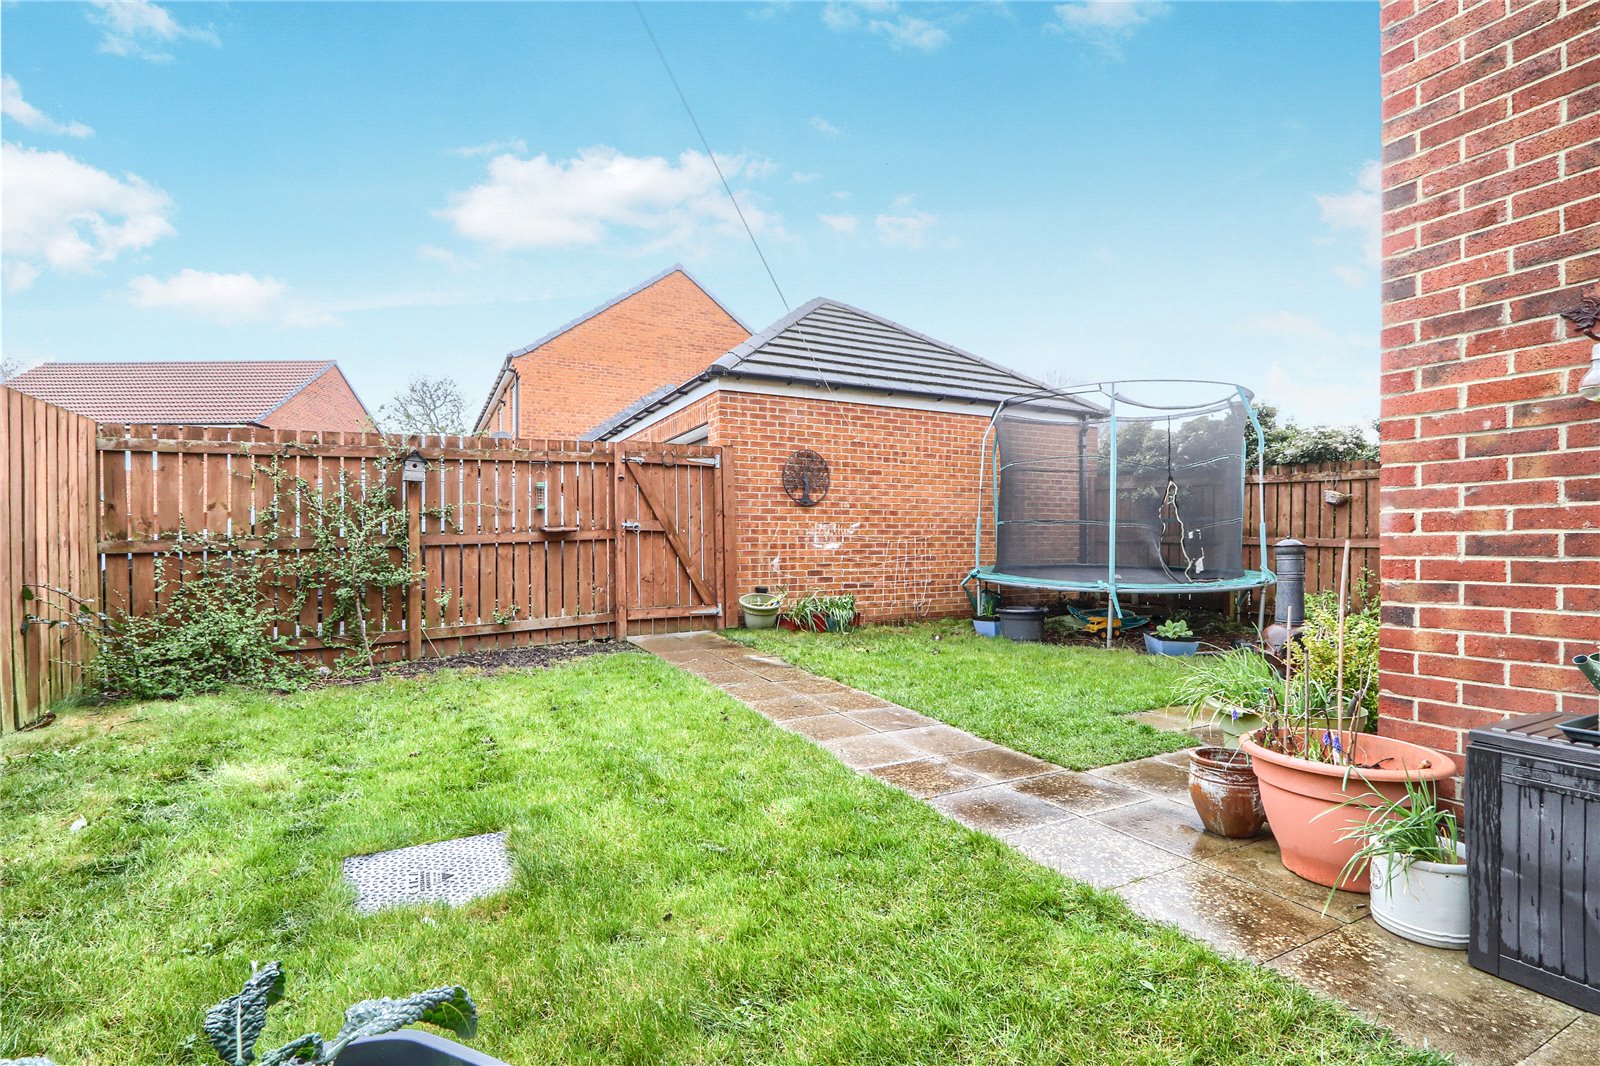 4 bed house for sale in Carina Crescent, Stockton-on-Tees  - Property Image 6